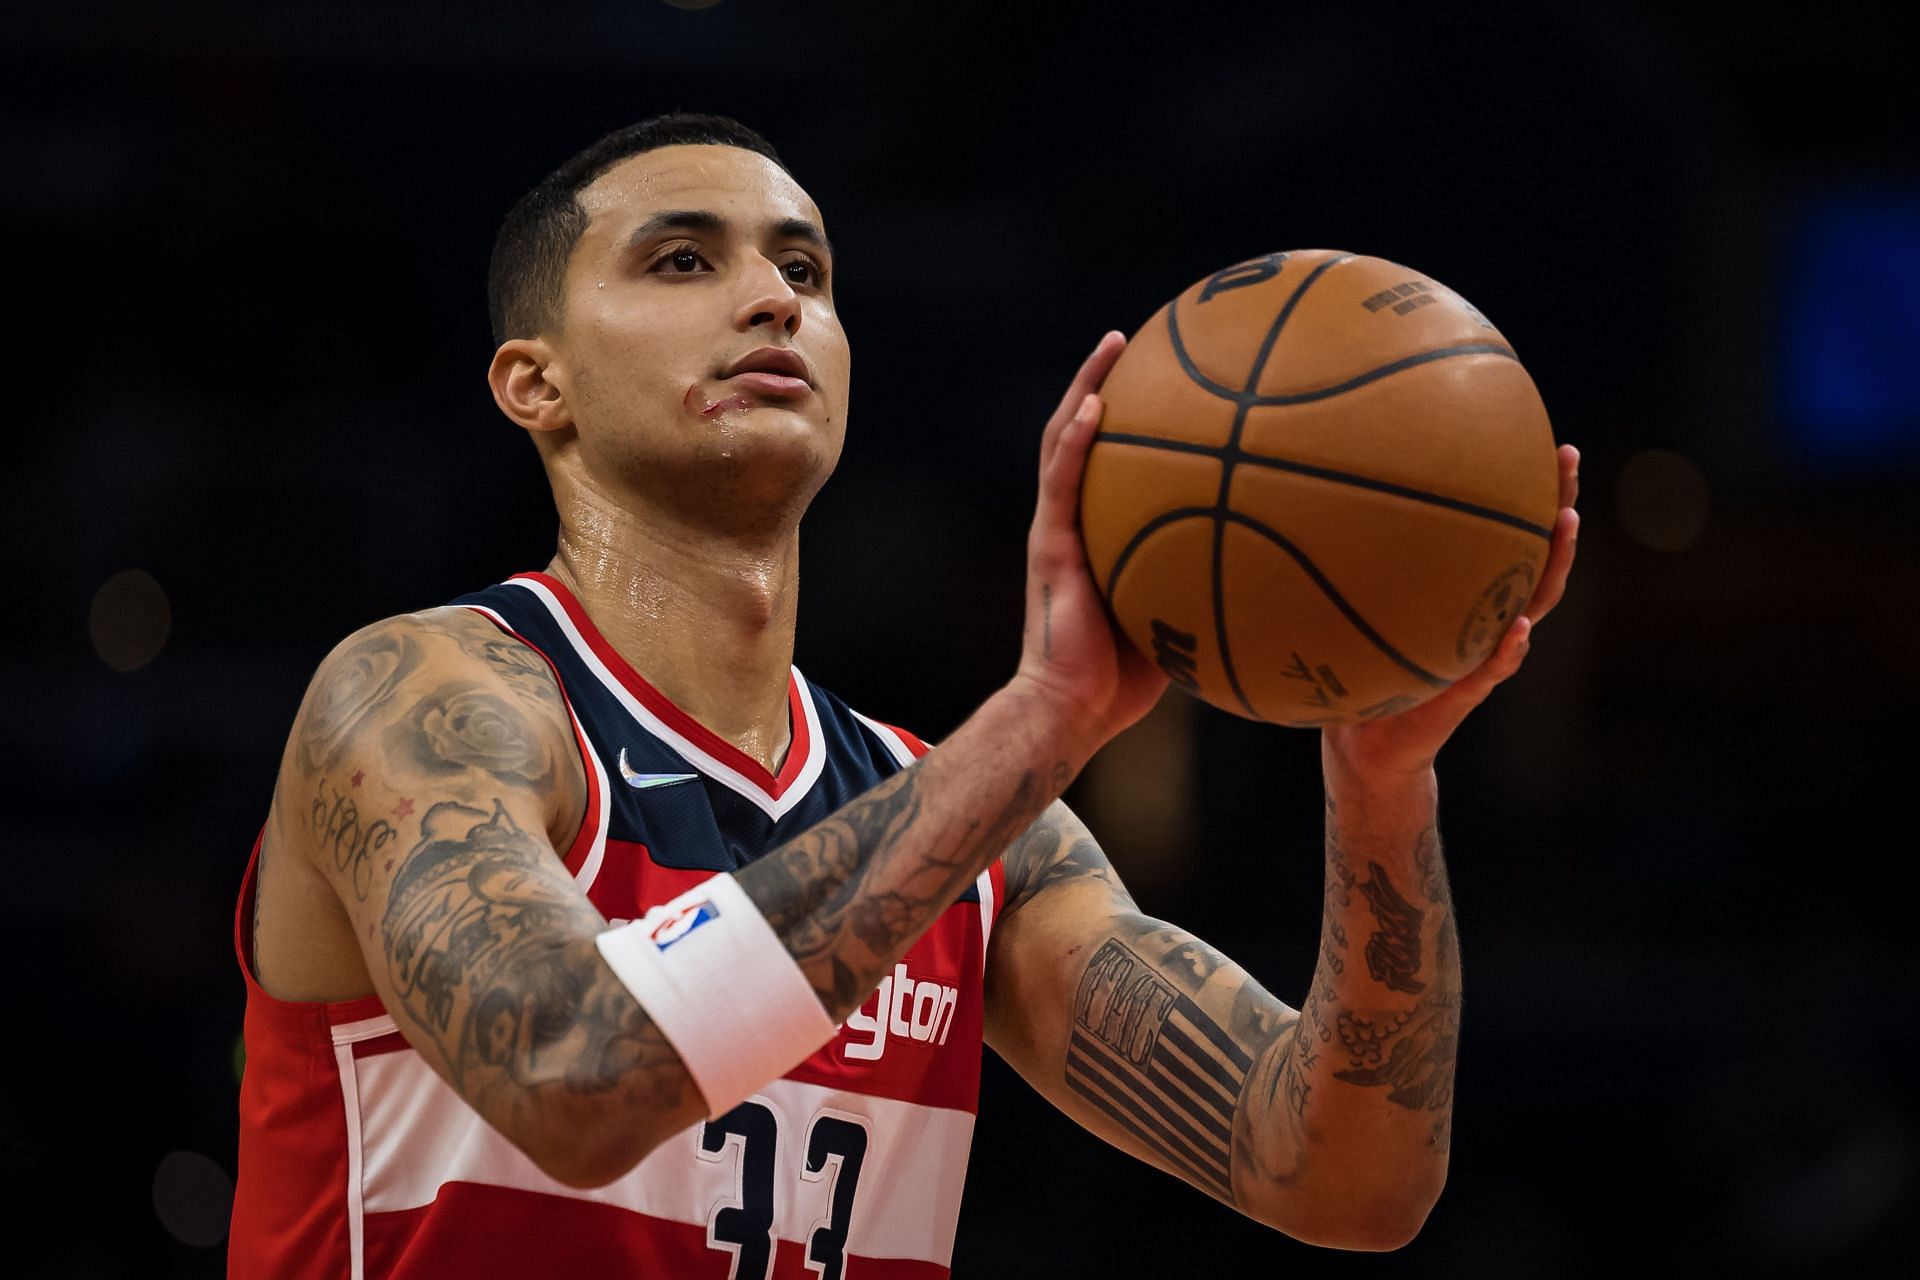 With a more significant role on the Wizards, Kuzma had the best statistical season of his career.